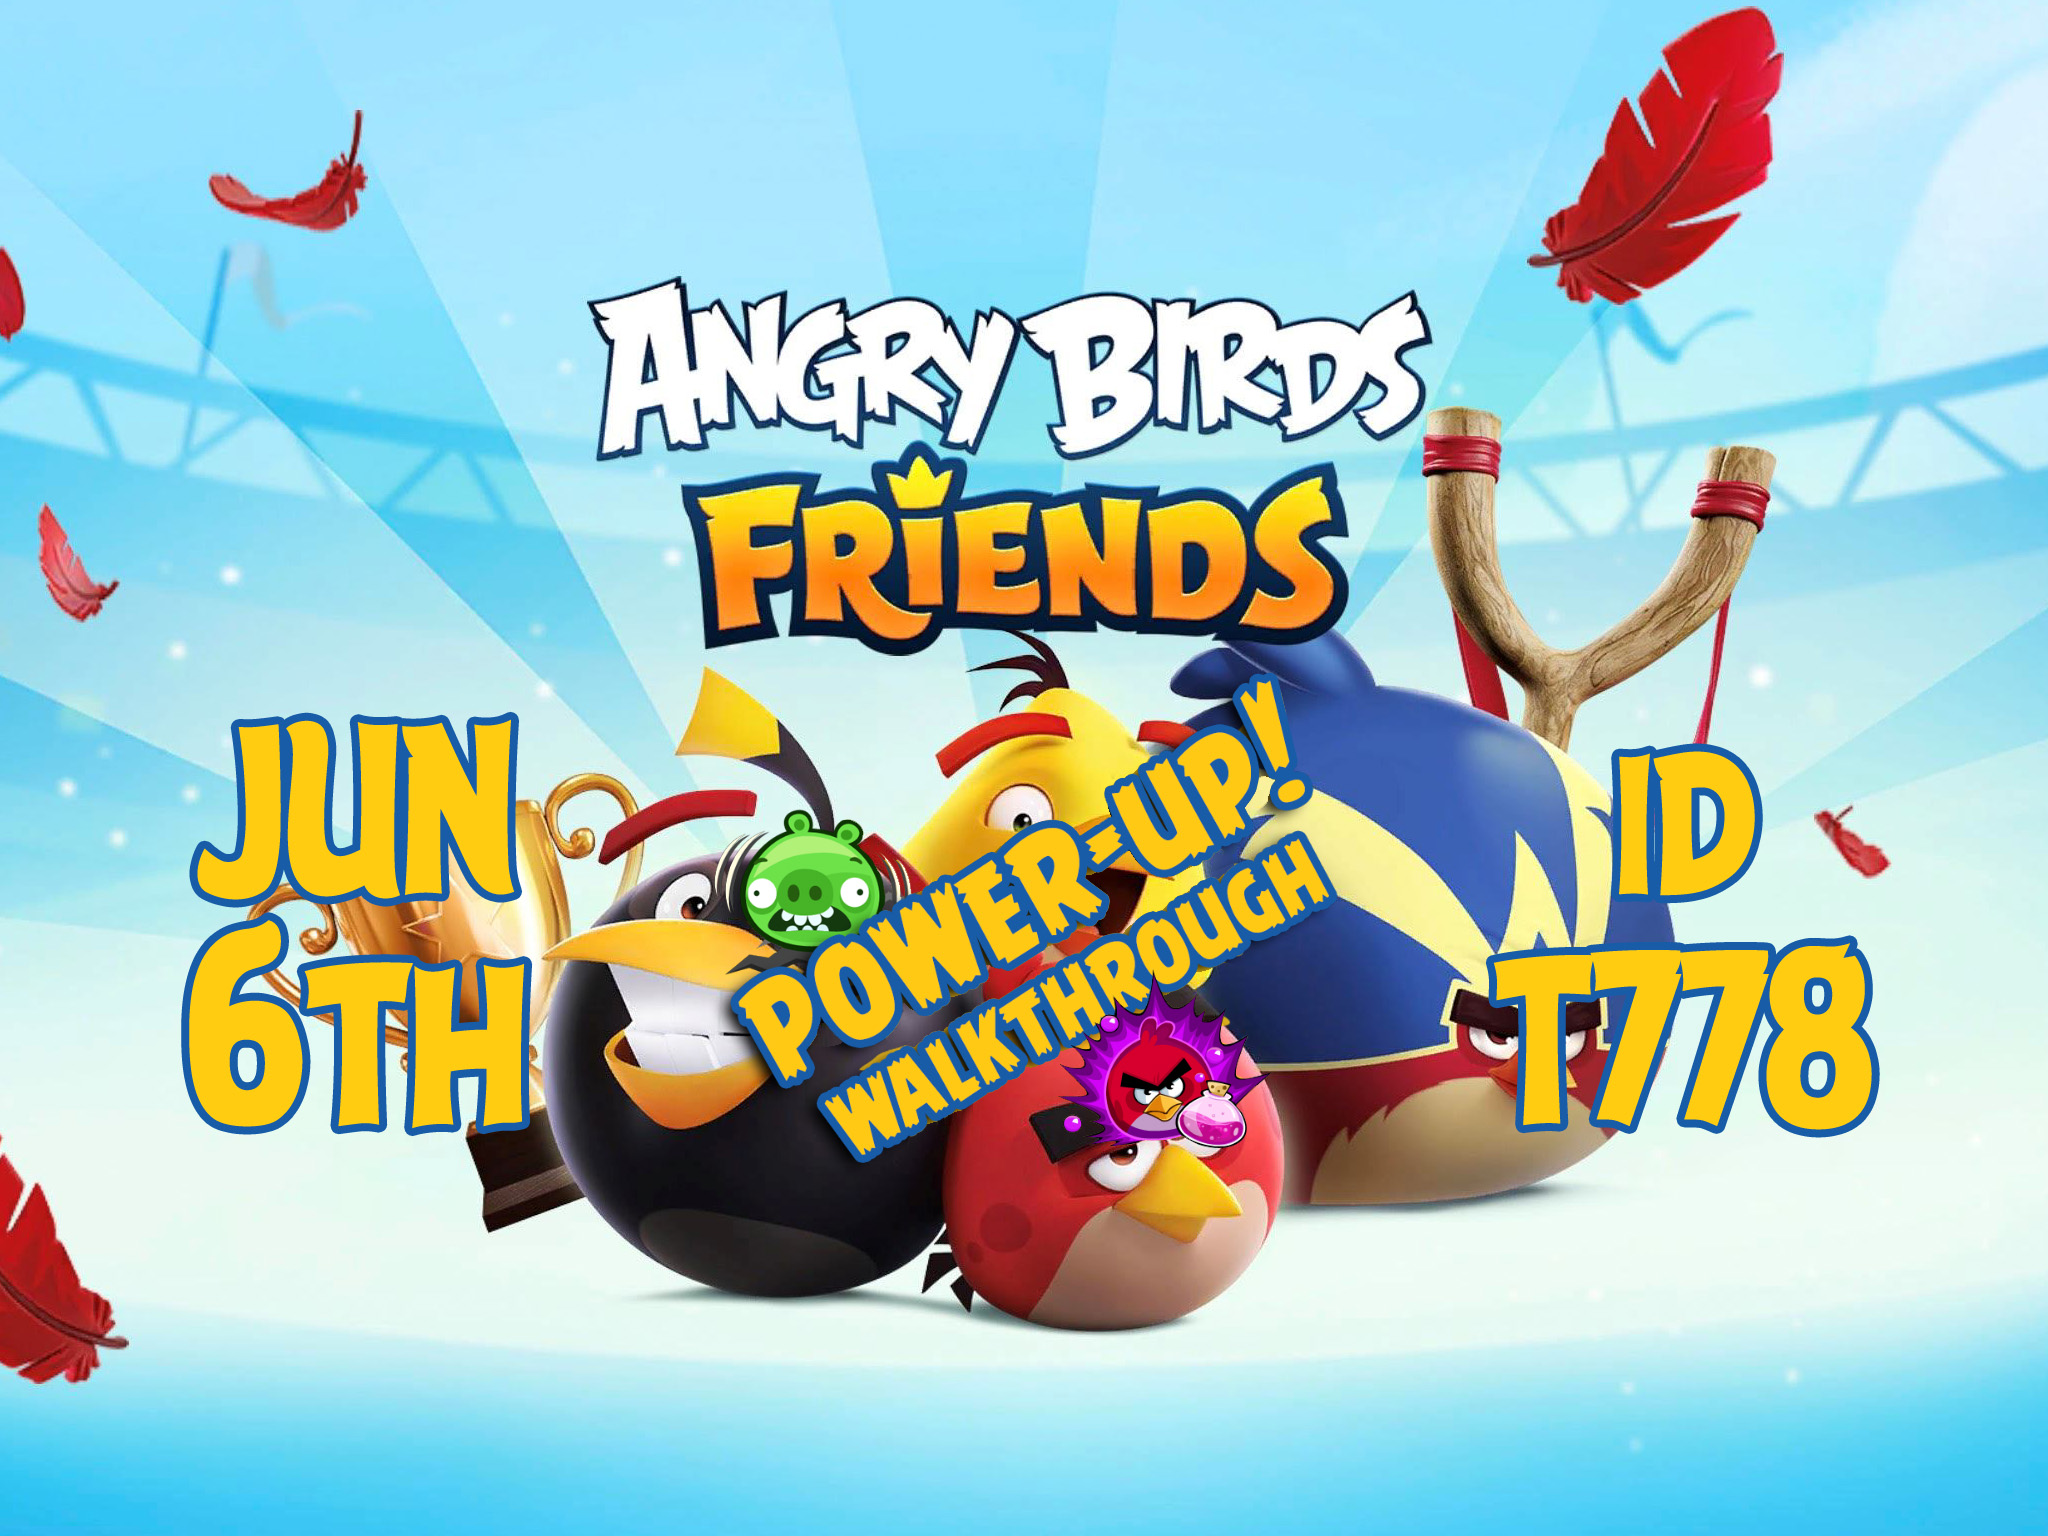 Angry-Birds-Friends-Tournament-T778-Feature-Image-PU